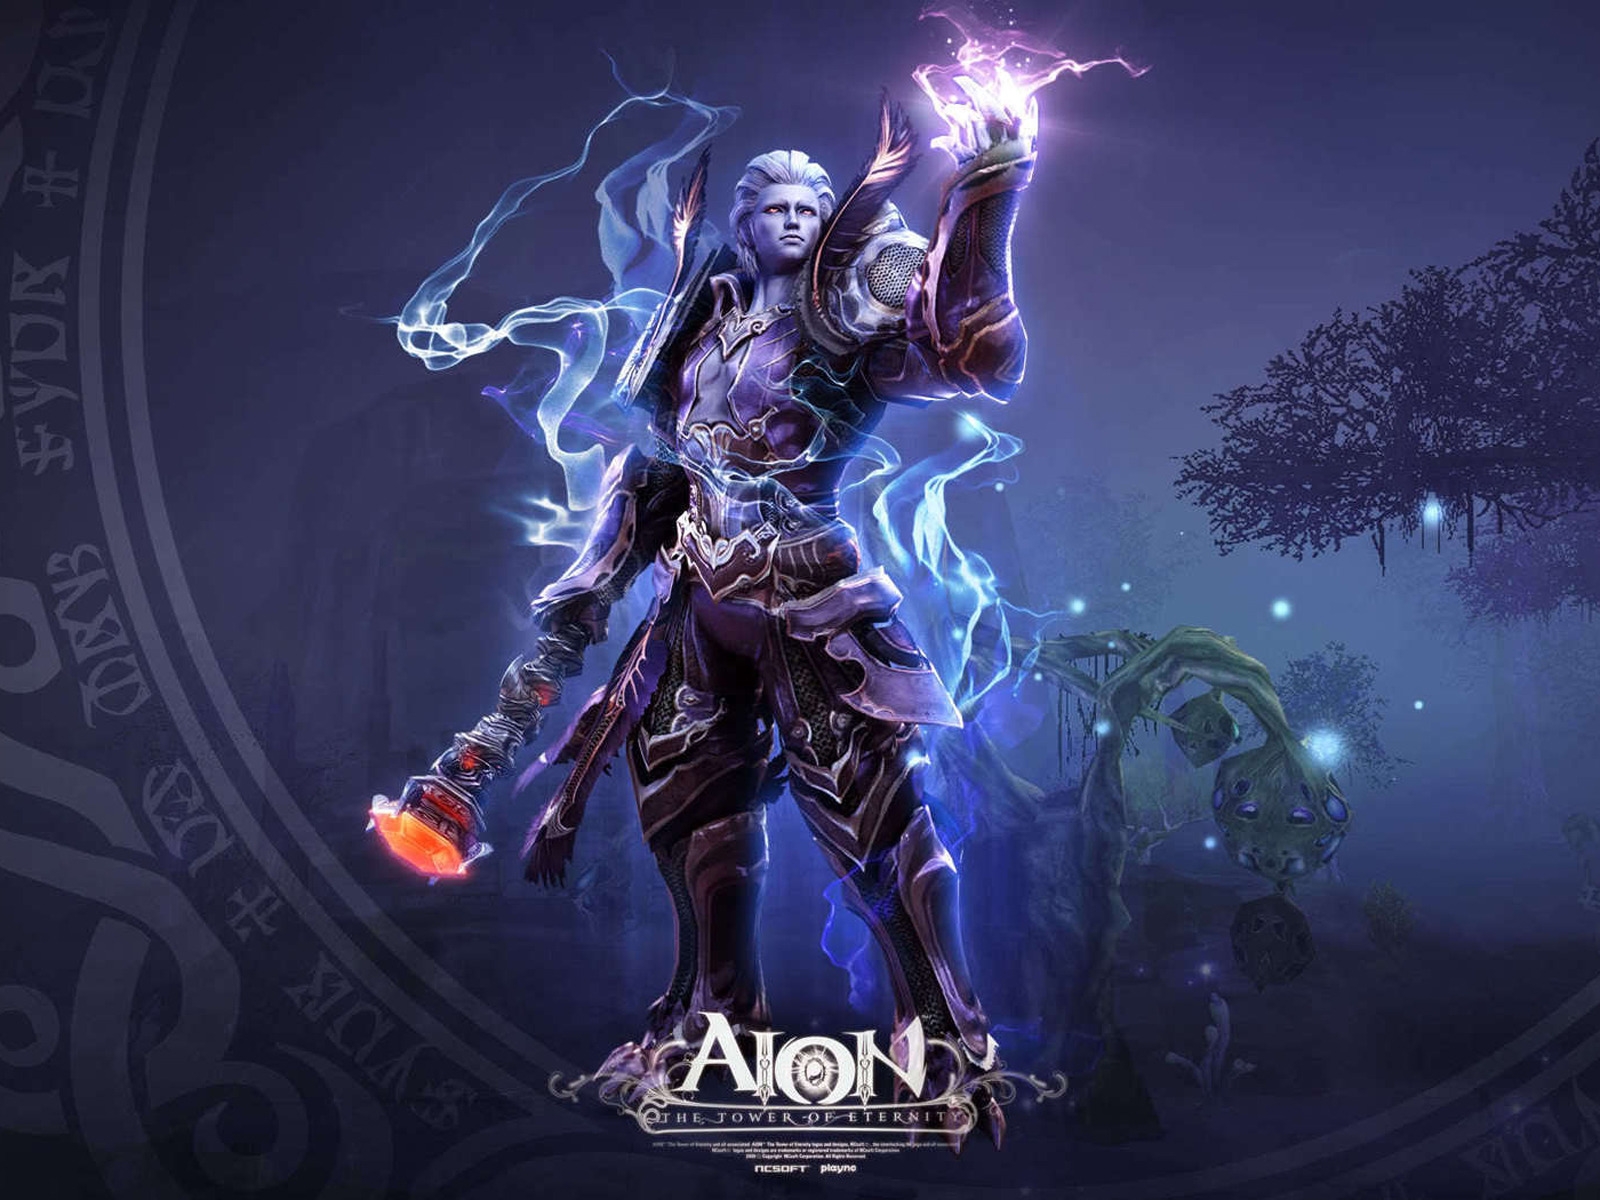 Aion The Tower of Eternity Game for 1600 x 1200 resolution